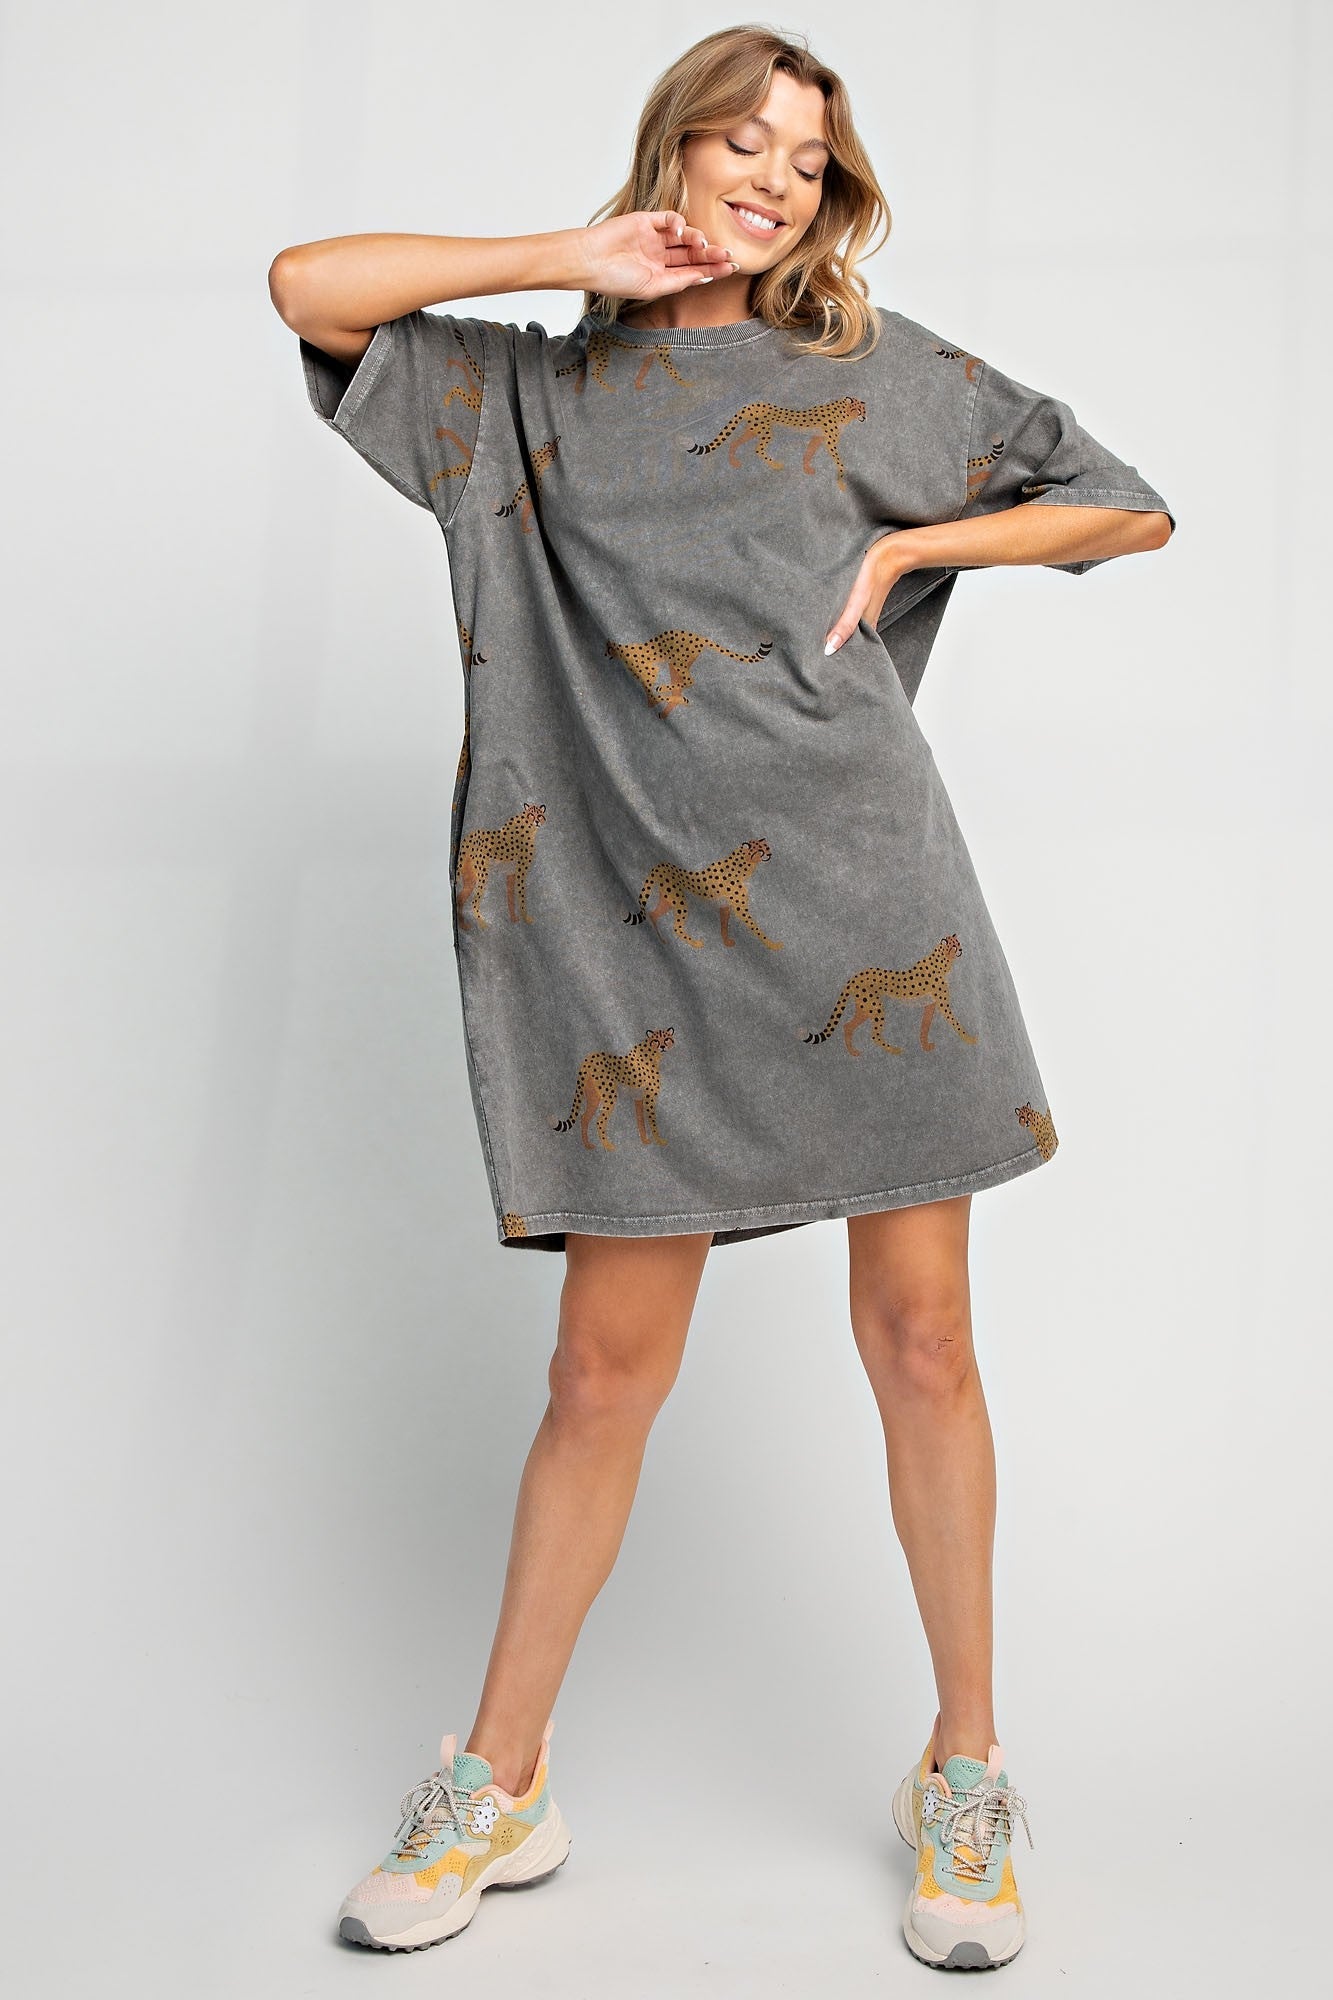 "Cheetah Or Not" T-Shirt Dress (Grey) - Happily Ever Aften